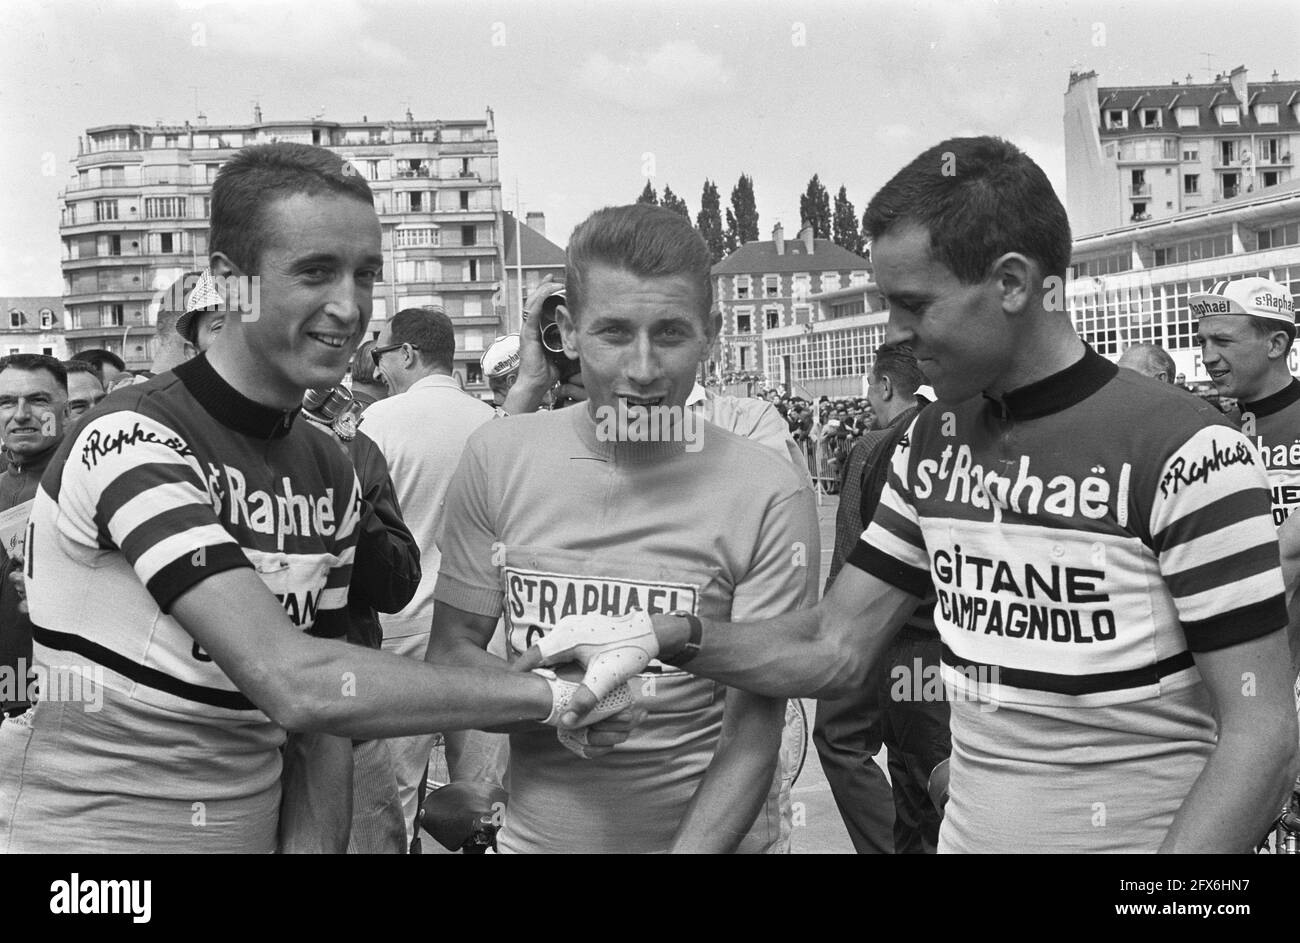 Ab Geldermans, Jacques Anquetil and Jo de Roo, Tour de France 1964, The Netherlands, 20th century press agency photo, news to remember, documentary, historic photography 1945-1990, visual stories, human history of the Twentieth Century, capturing moments in time Stock Photo